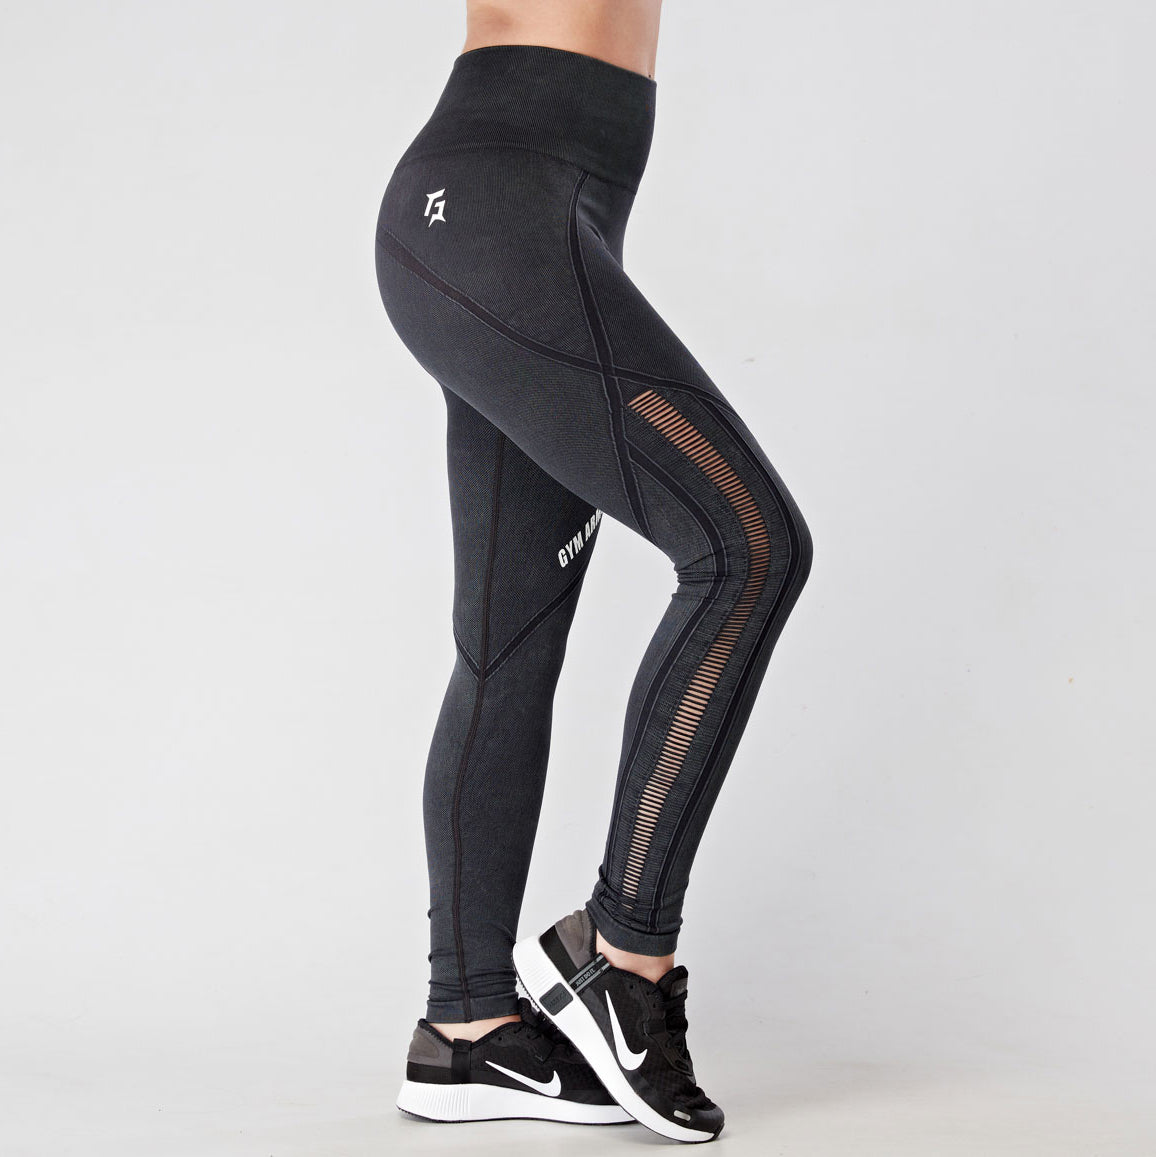 Women's Running Leggings SWIRL E-store repinpeace.com - Polish manufacturer  of sportswear for fitness, Crossfit, gym, running. Quick delivery and easy  return and exchange